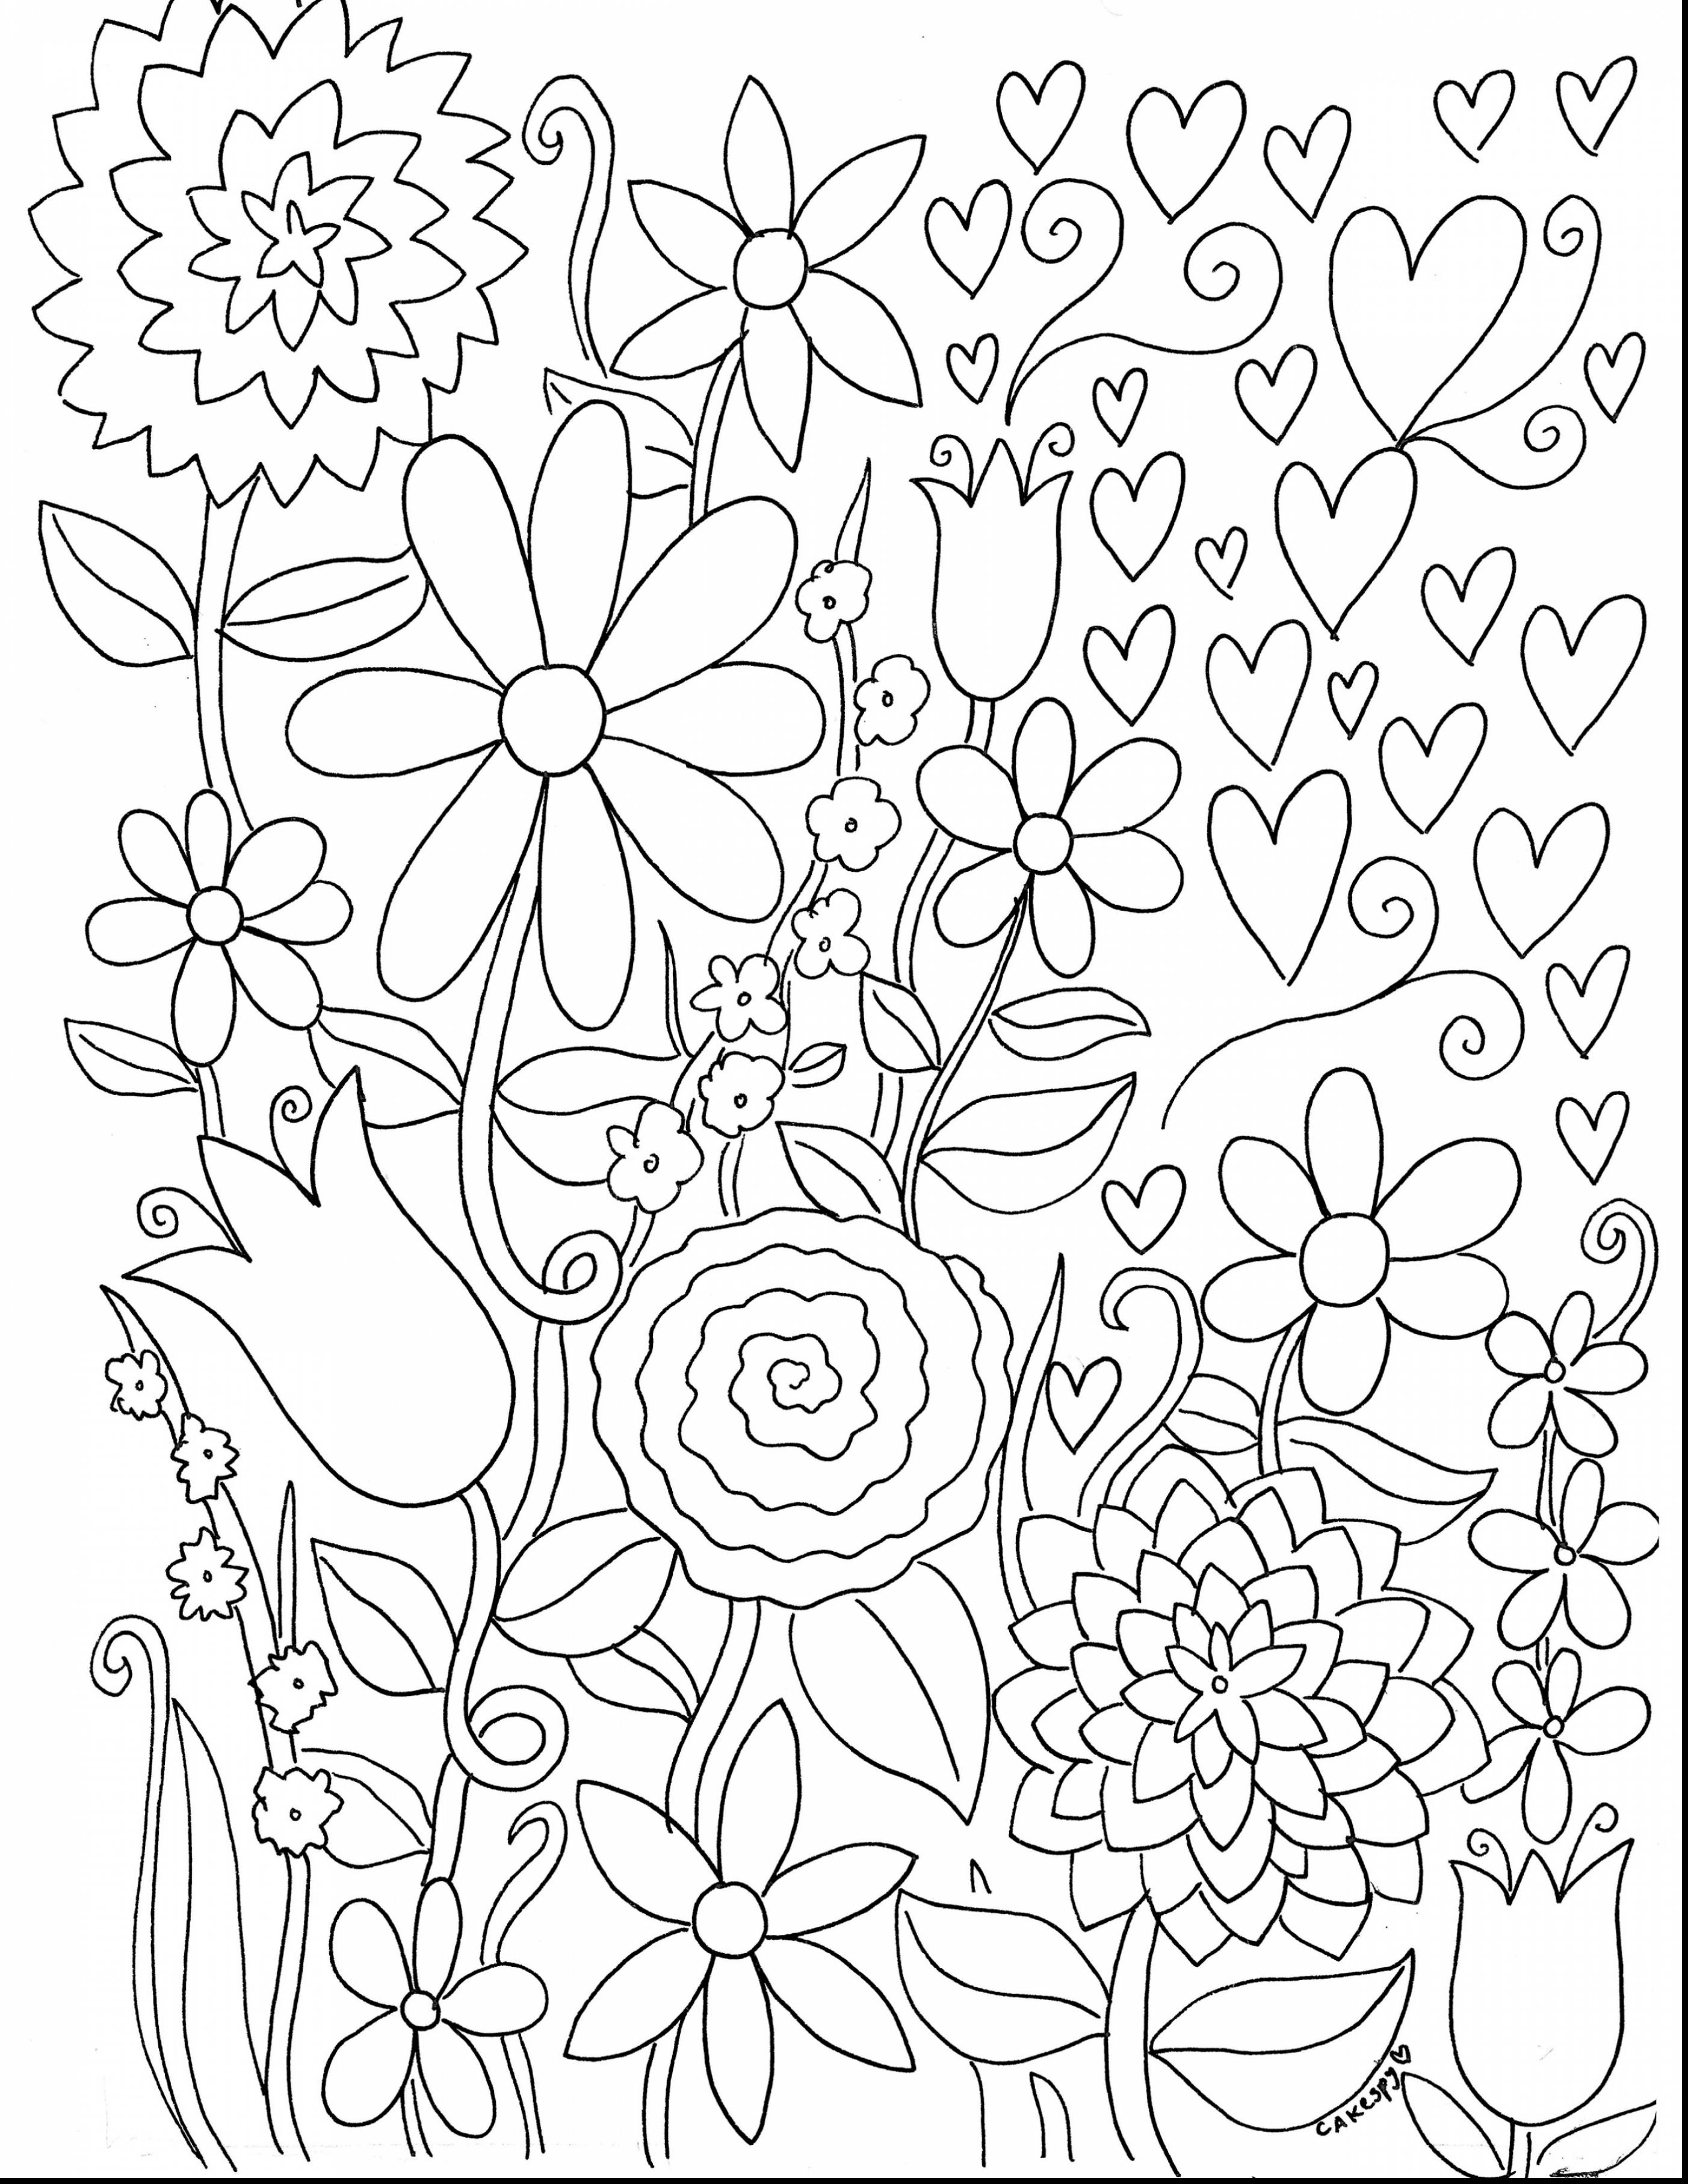 653 Cartoon Create Coloring Page From Image for Kids